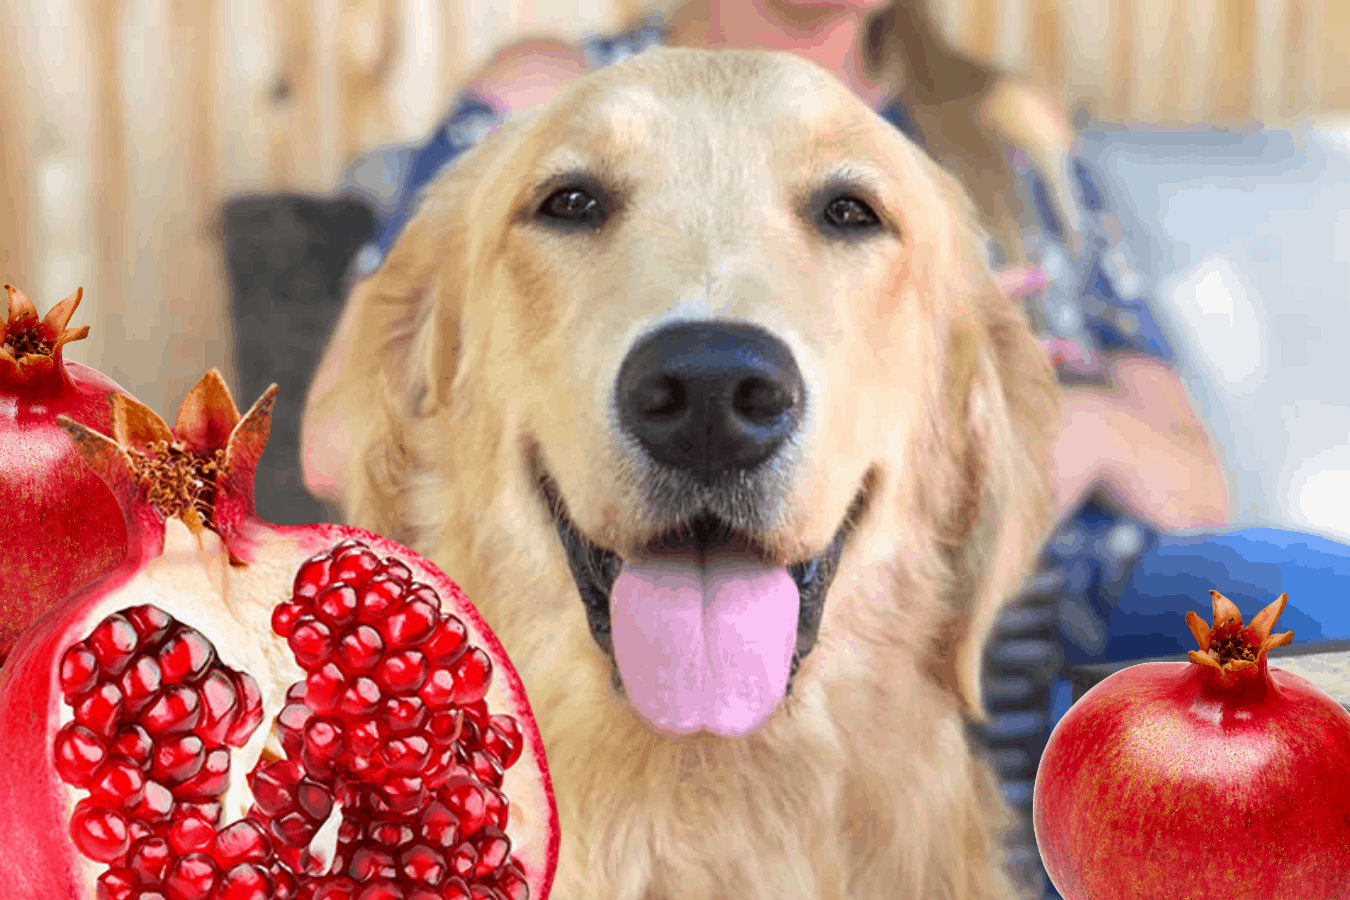 can dogs eat pomegranate